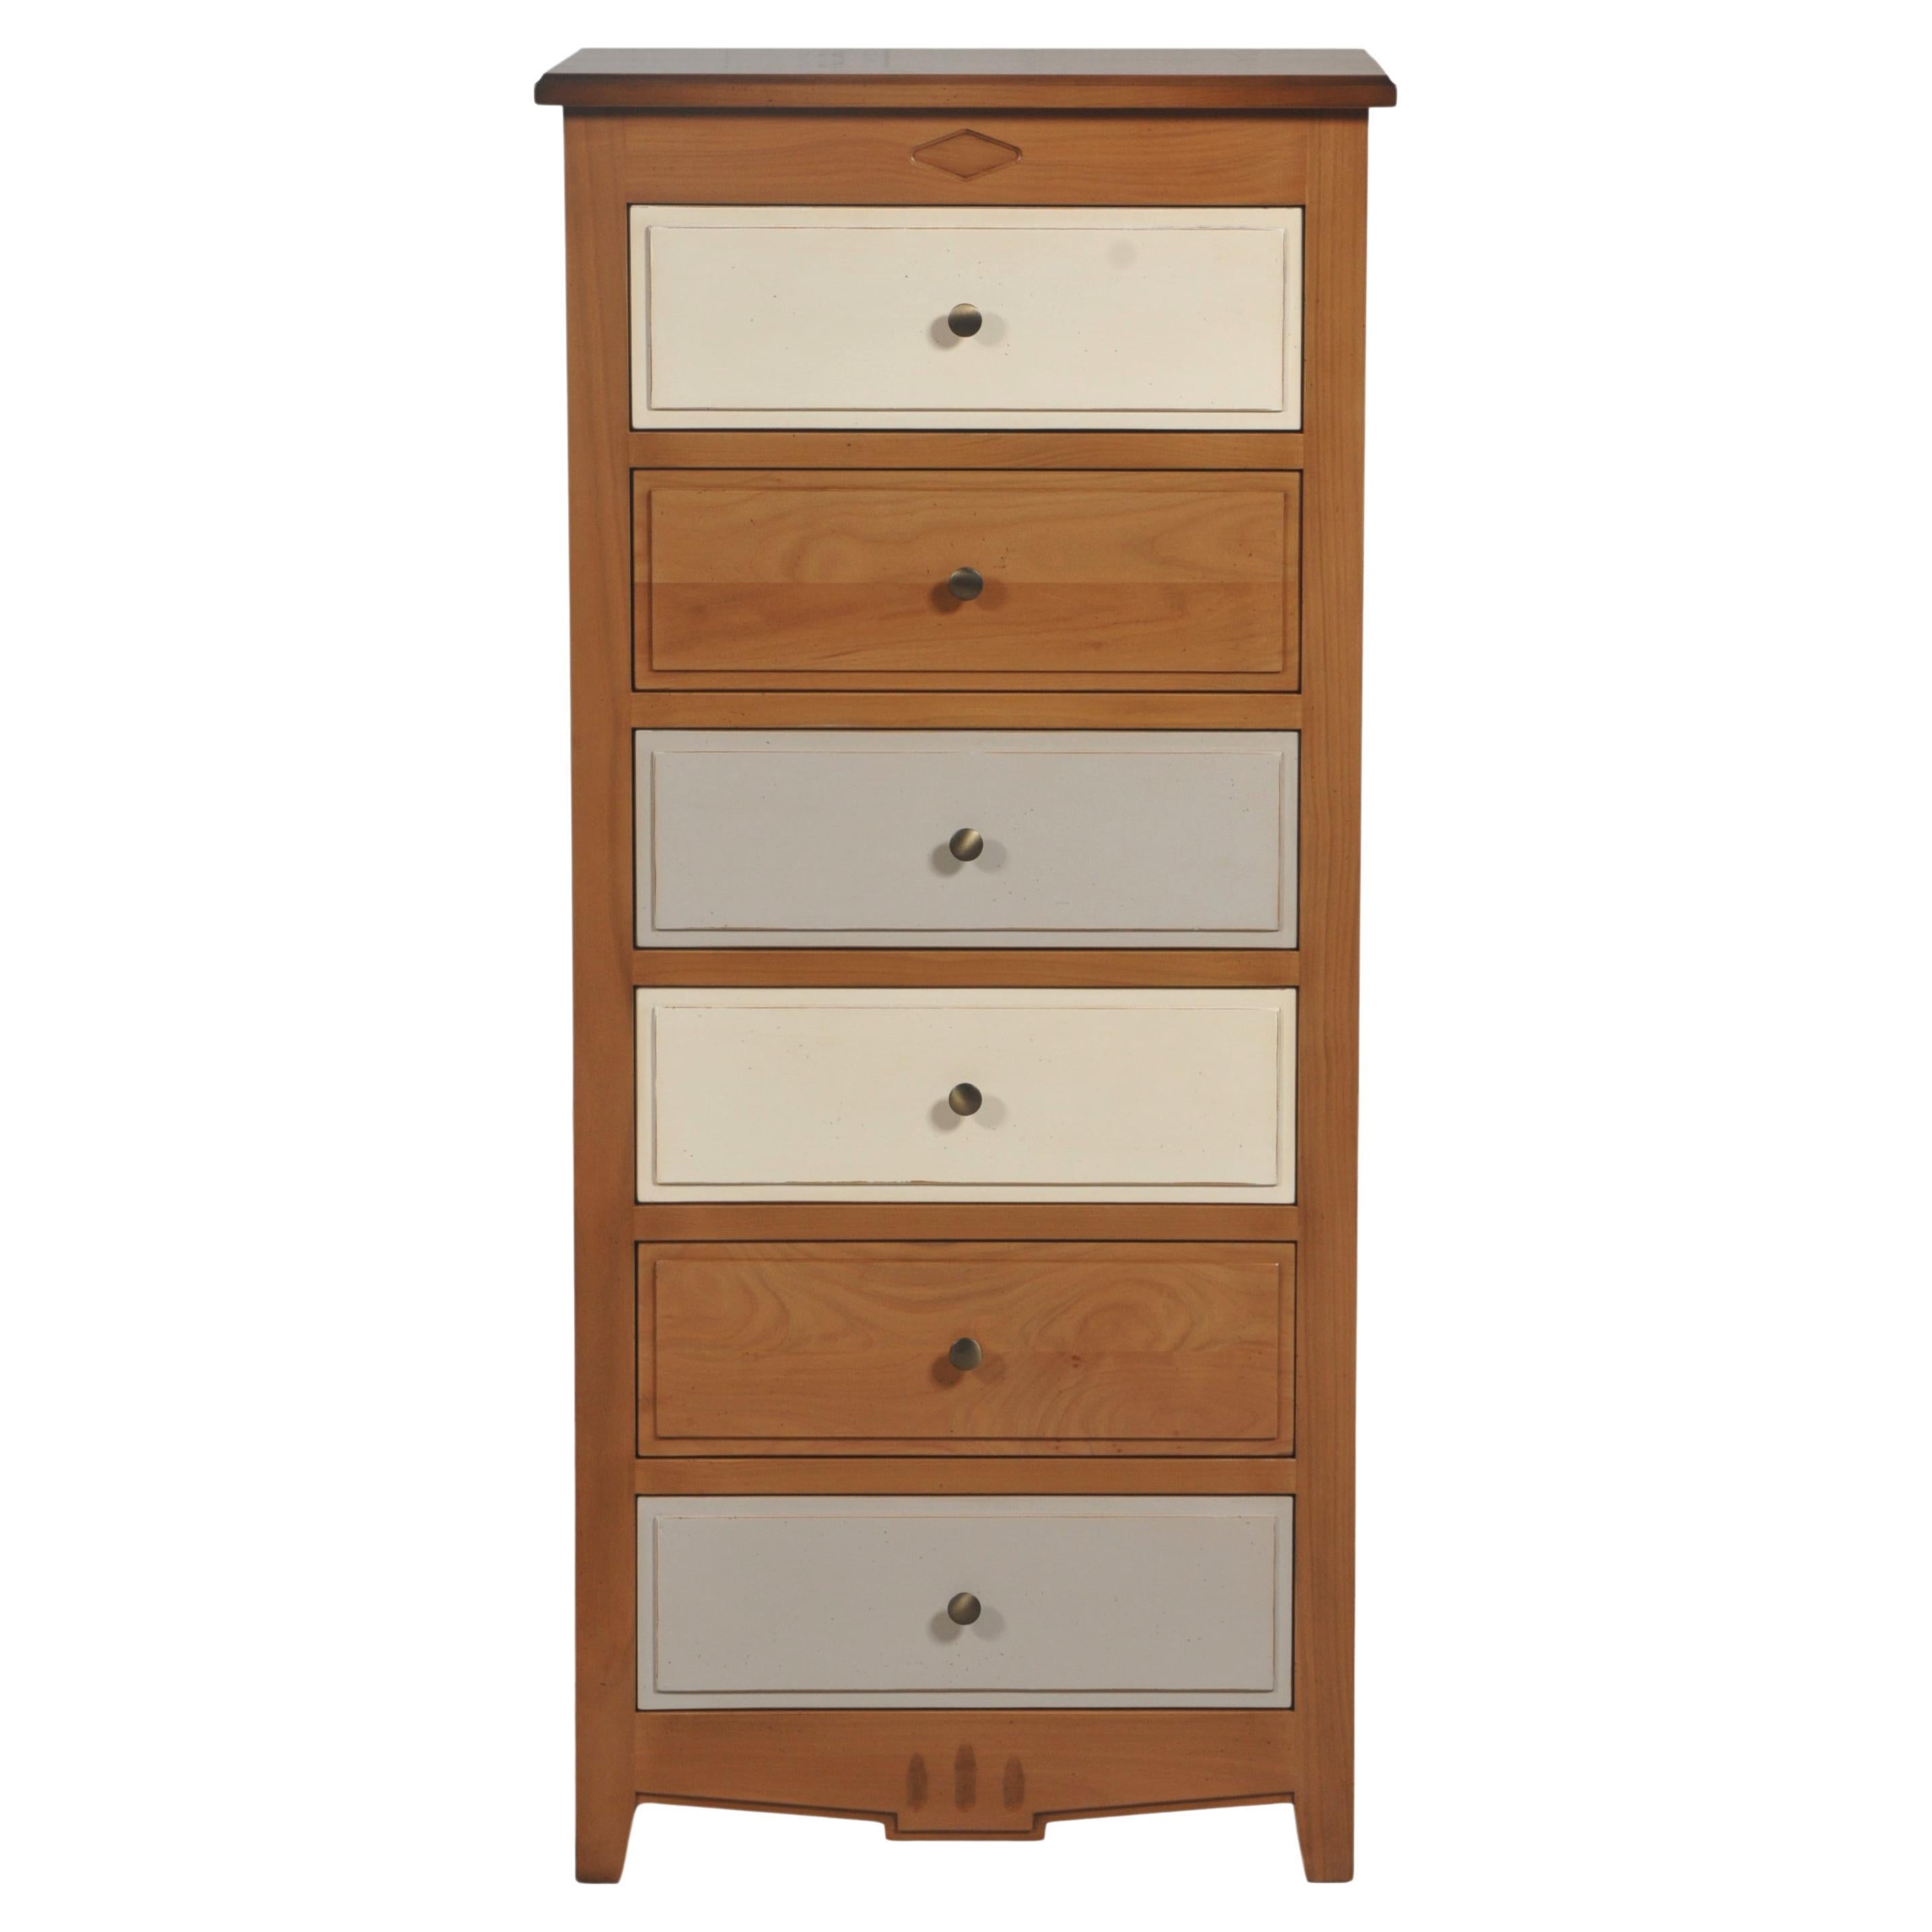 French Chiffonnier with 6 Drawers in a Louis XVI style, wood & gray variations